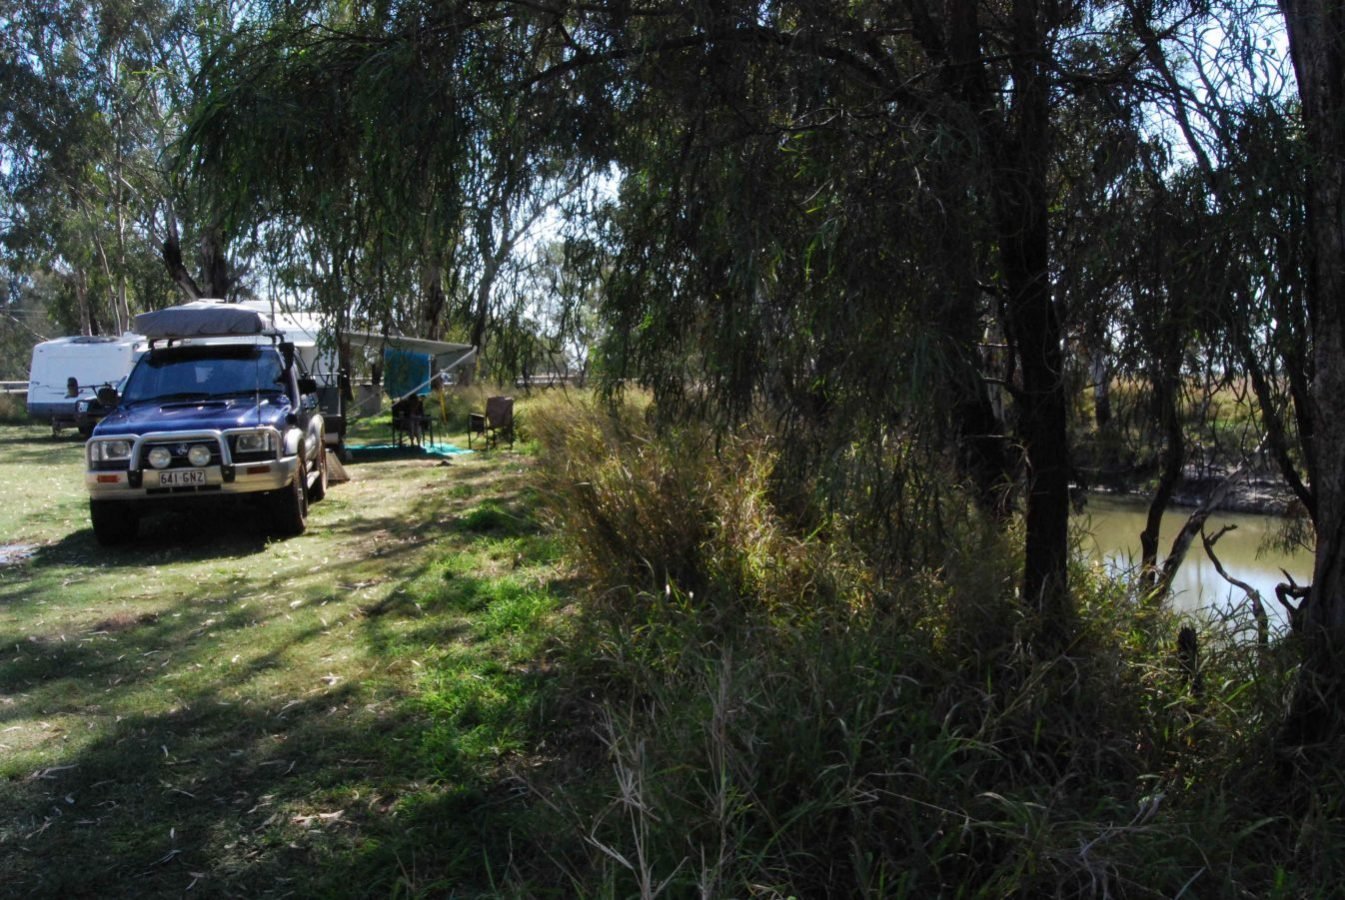 Cecil Plains Camping Reserve023 2015 10 03